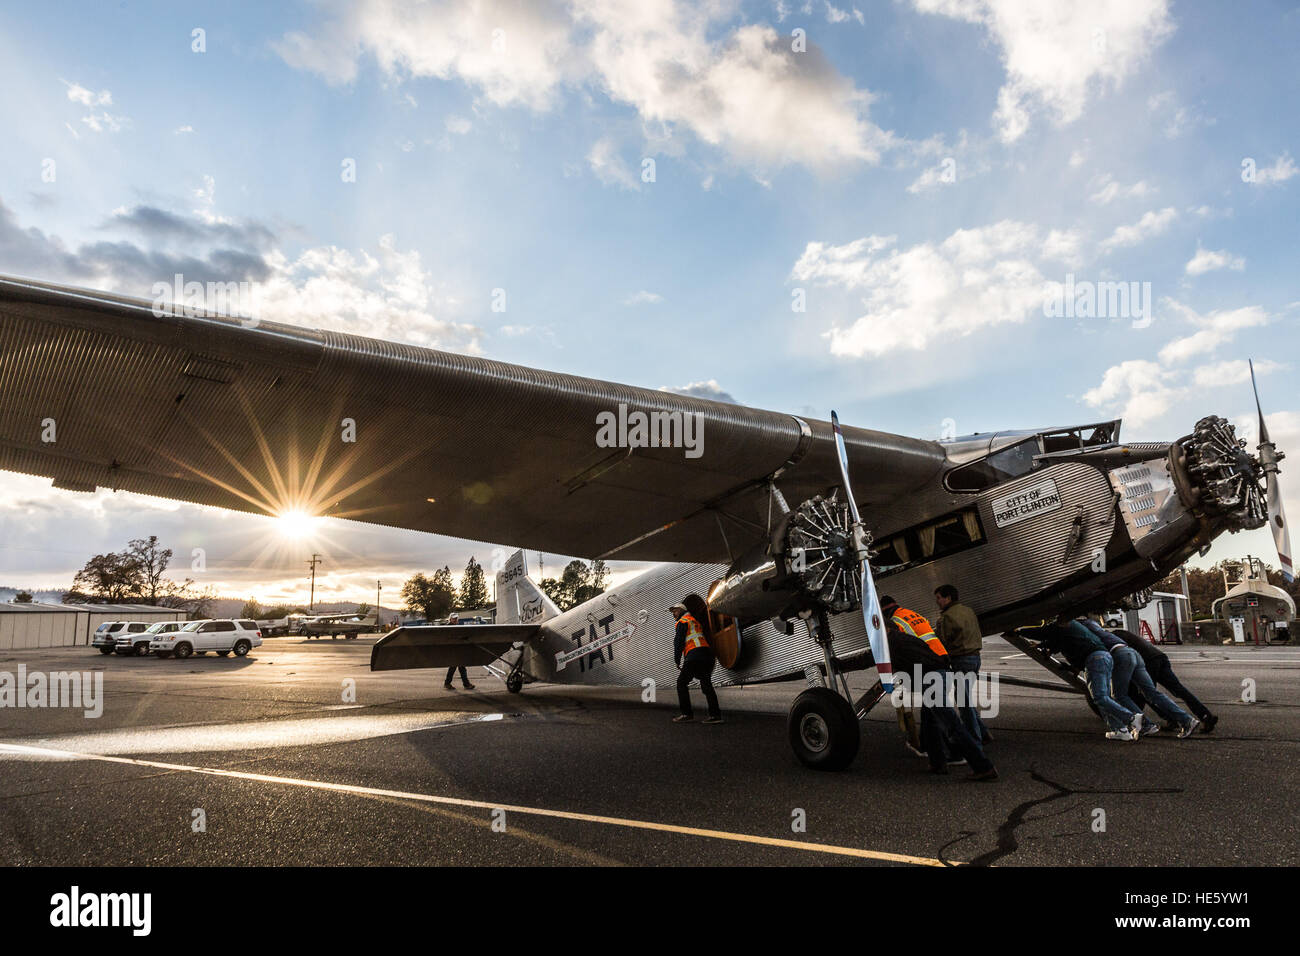 Groveland, California, USA. 16th Dec, 2016. Friday, December 16, 2016.Volunteers at Pine Mountain Lake Airport in Groveland, California, push a 1928 Ford Tri-Motor airplane toward a fuel pump, in the late afternoon.This Ford Tri-Motor NC9645, nicknamed The Tin Goose, has a wingspan of 77 feet 6 inches and was constructed in 1928. It was named the City of Wichita, and it was used to introduce the first coast-to-coast passenger air/rail service in the United States on July 7, 1929, and the development and inauguration of the first all air passenger service on October 25, 1930.Experiment Stock Photo